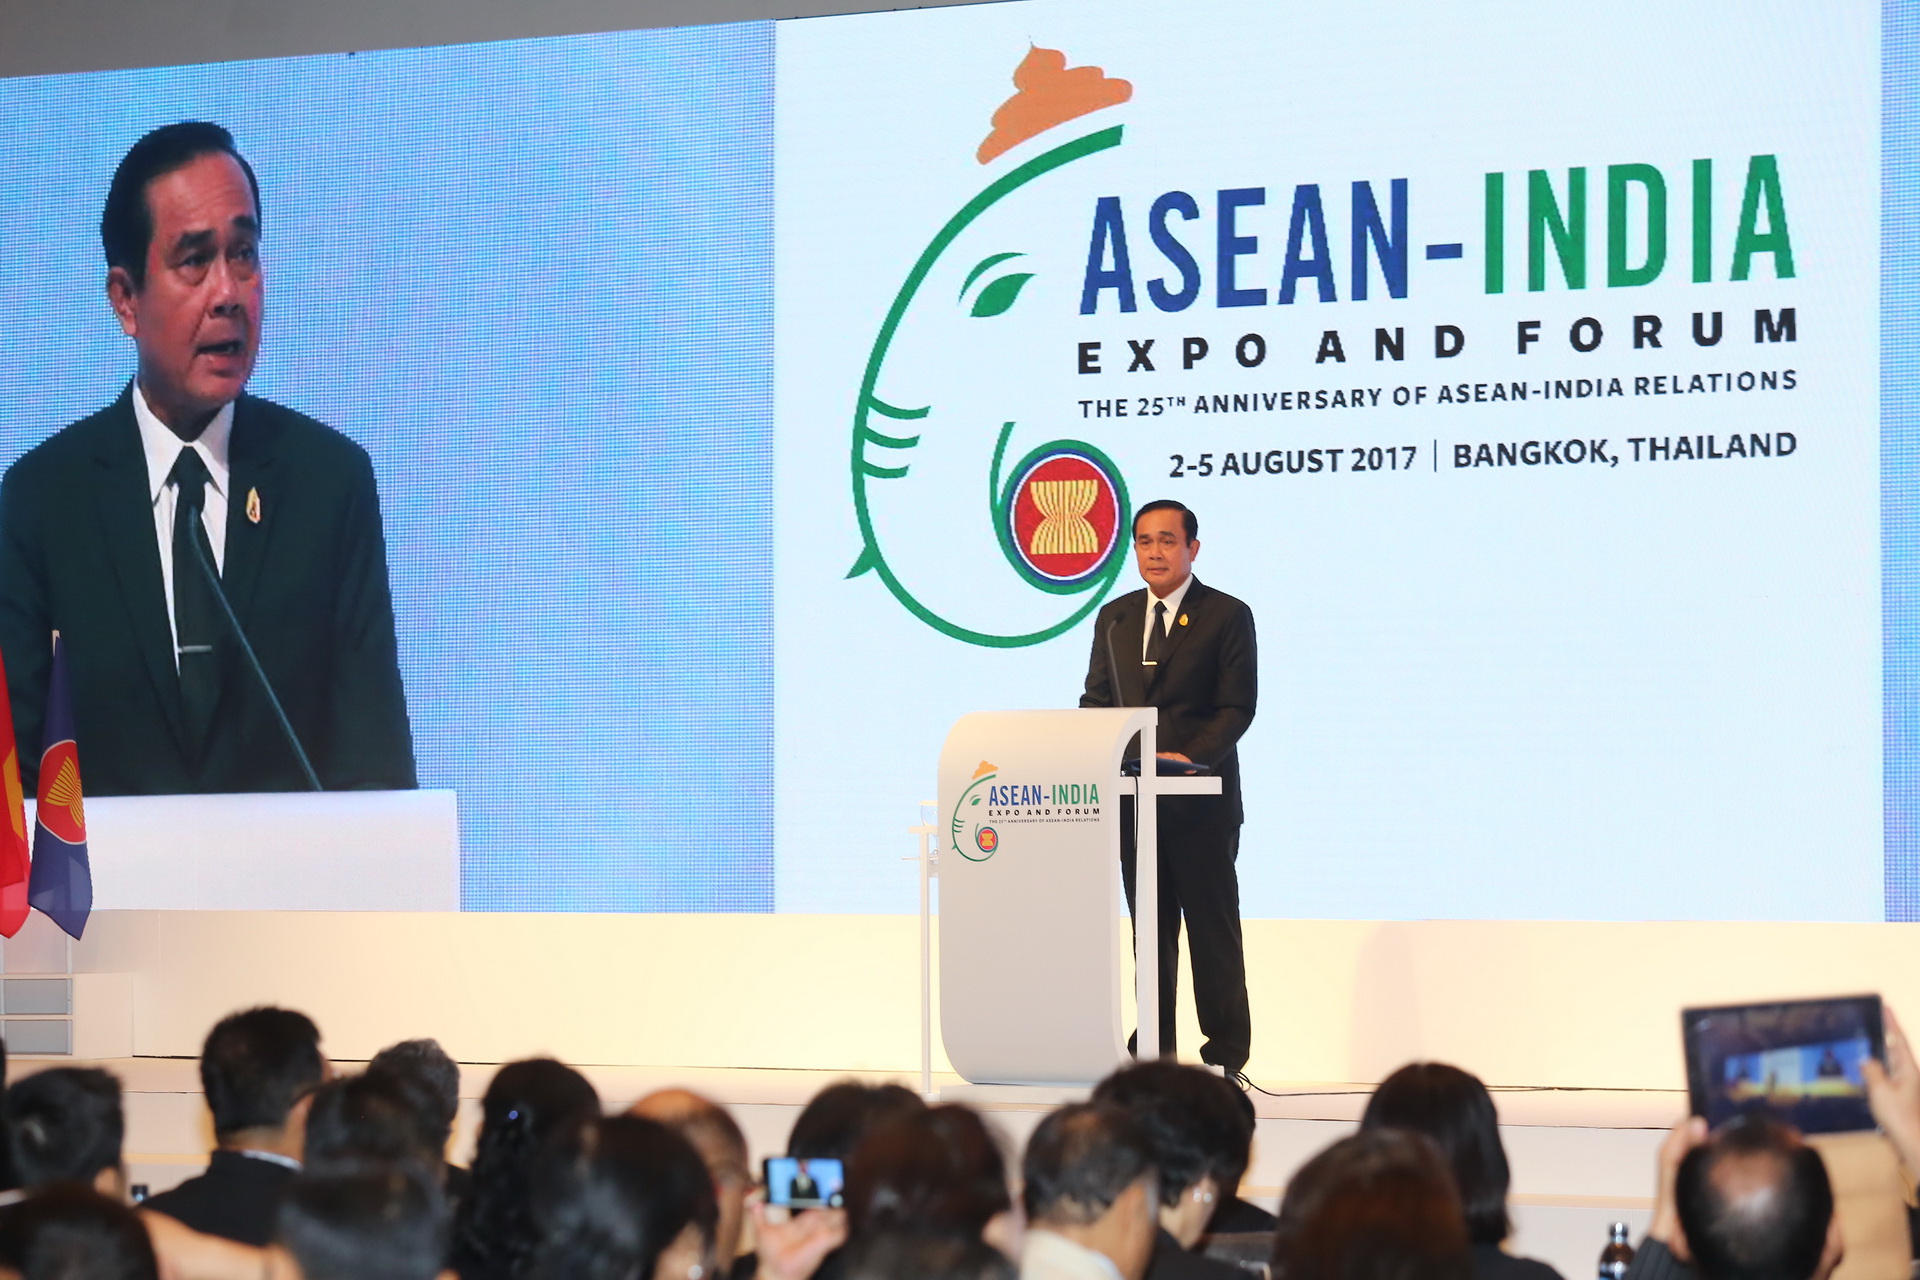 Welcoming Remarks (ASEAN-India 2017)